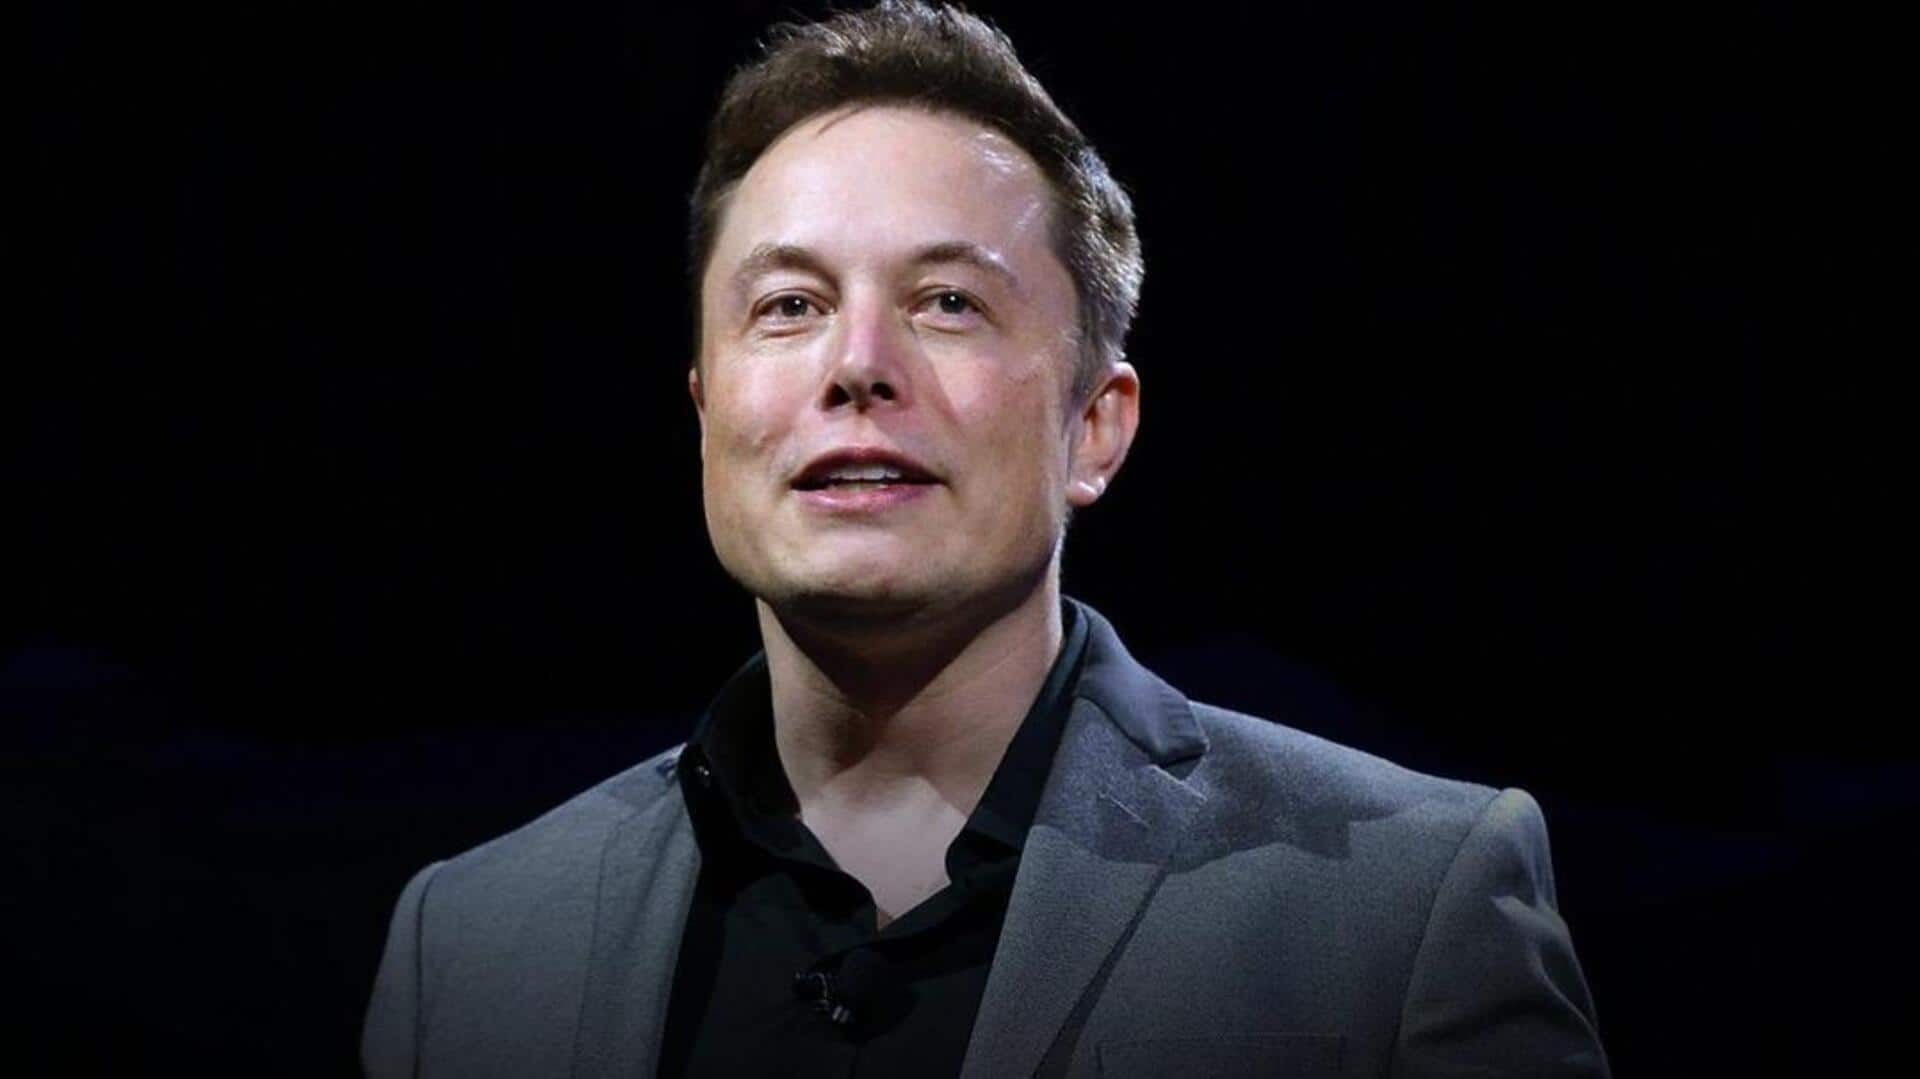 Musk sued for defamation after falsely claiming man as neo-Nazi